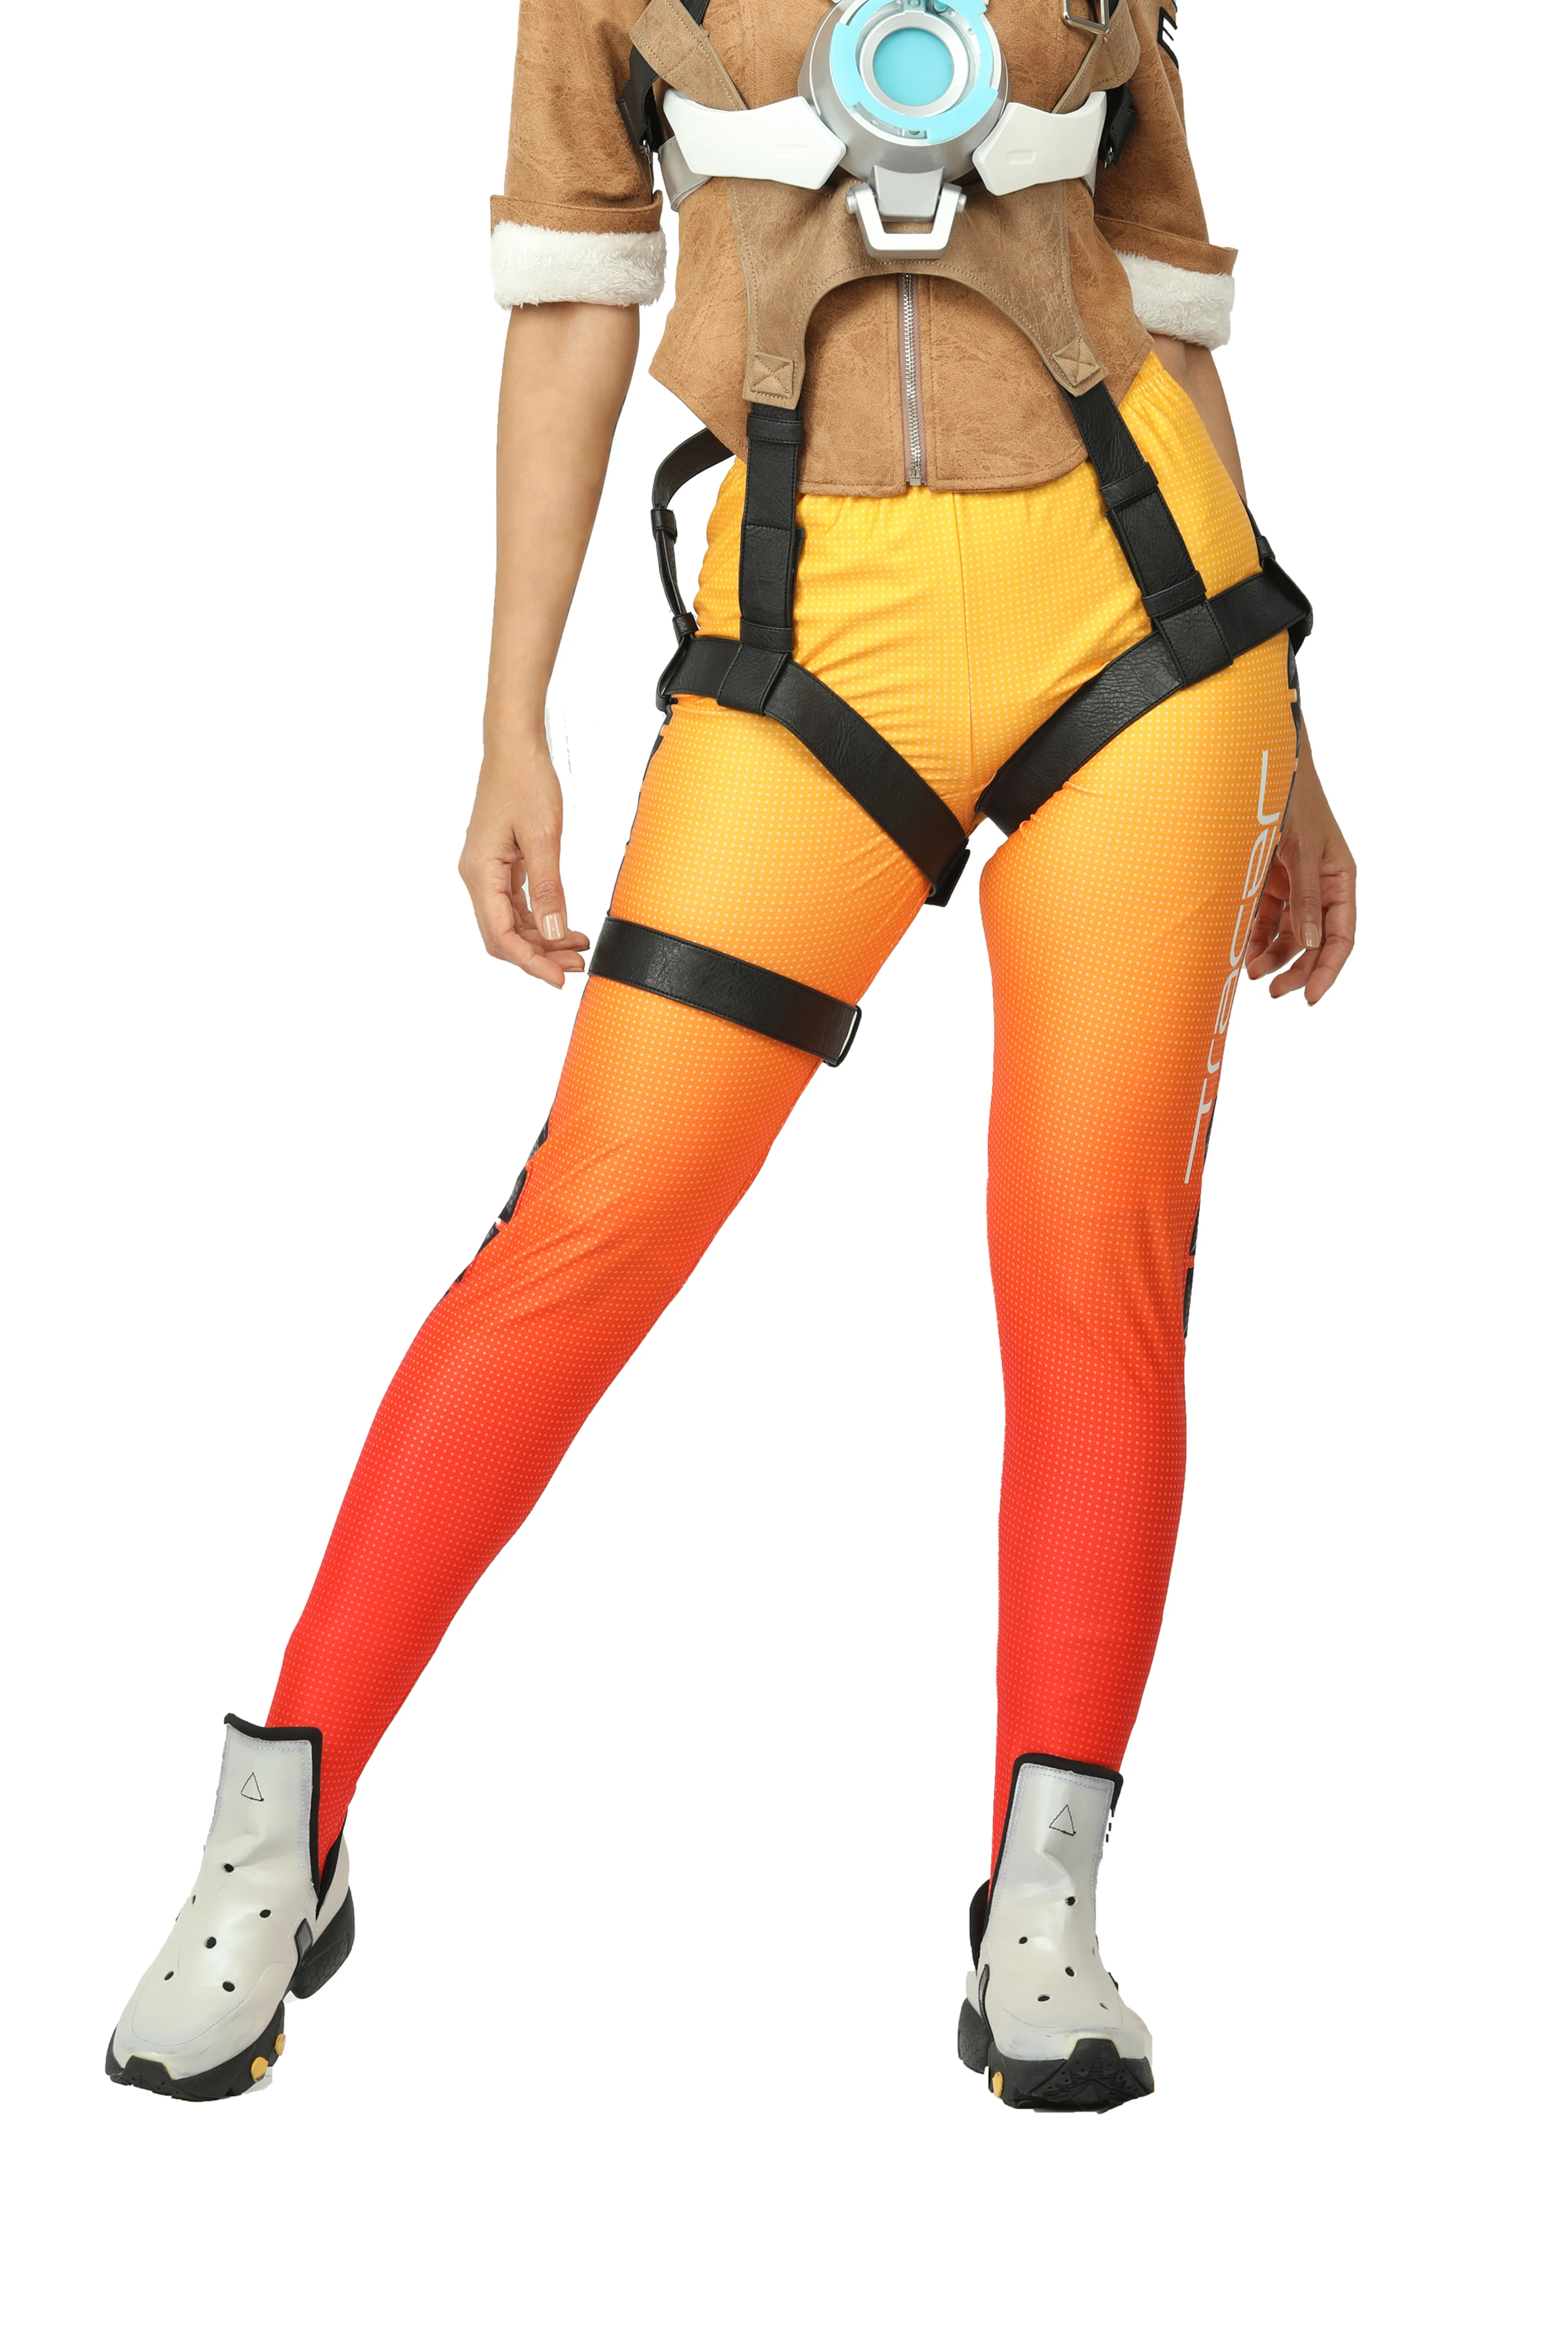 COSTHEME Overwatch Tracer Pants, Officially Licensed, Lena Oxton Women's Cosplay Costume